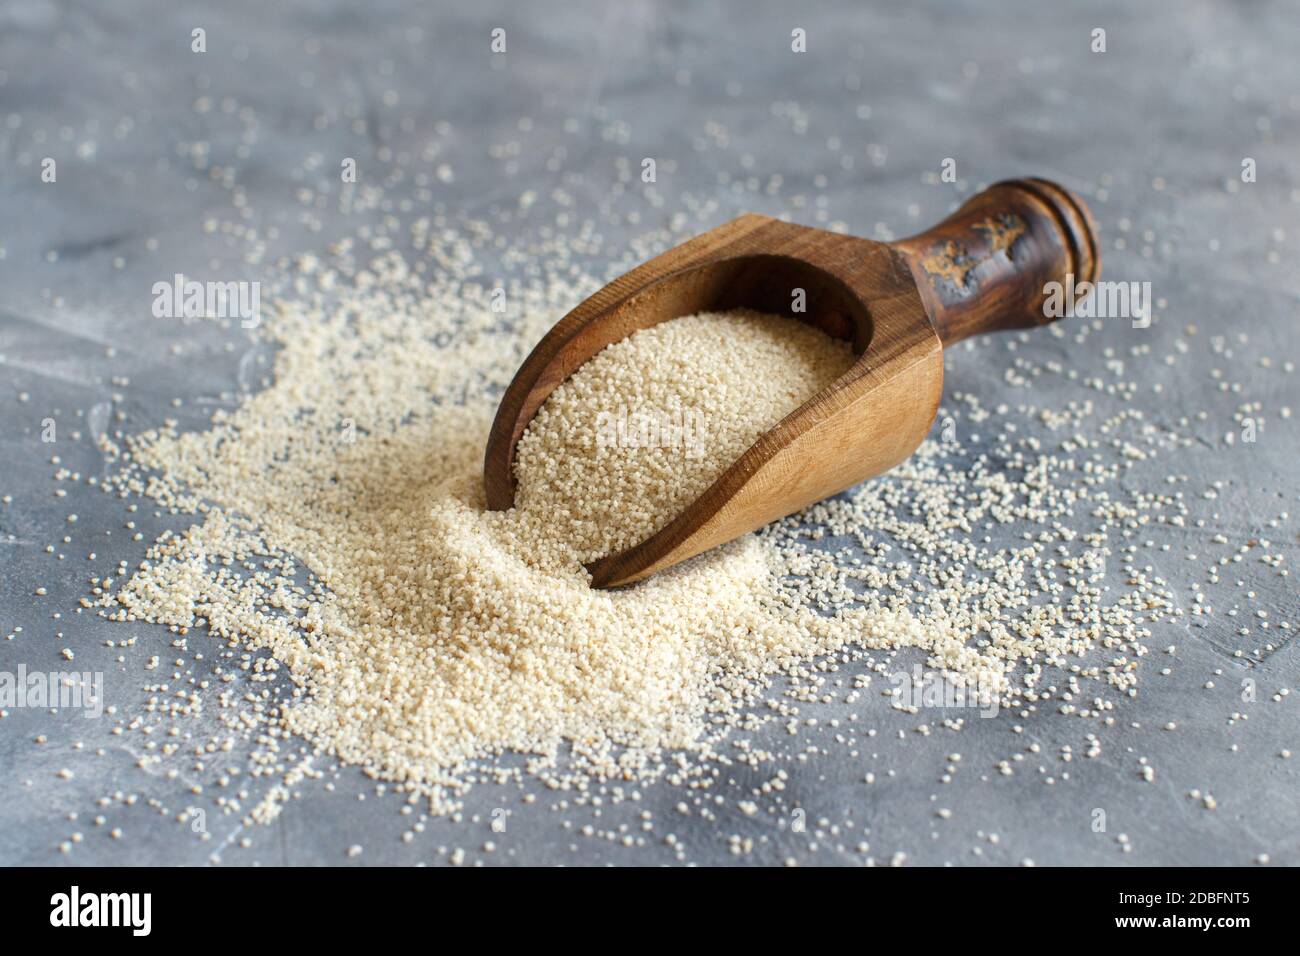 Raw uncooked fonio seeds with a spoon on grey background close up Stock Photo